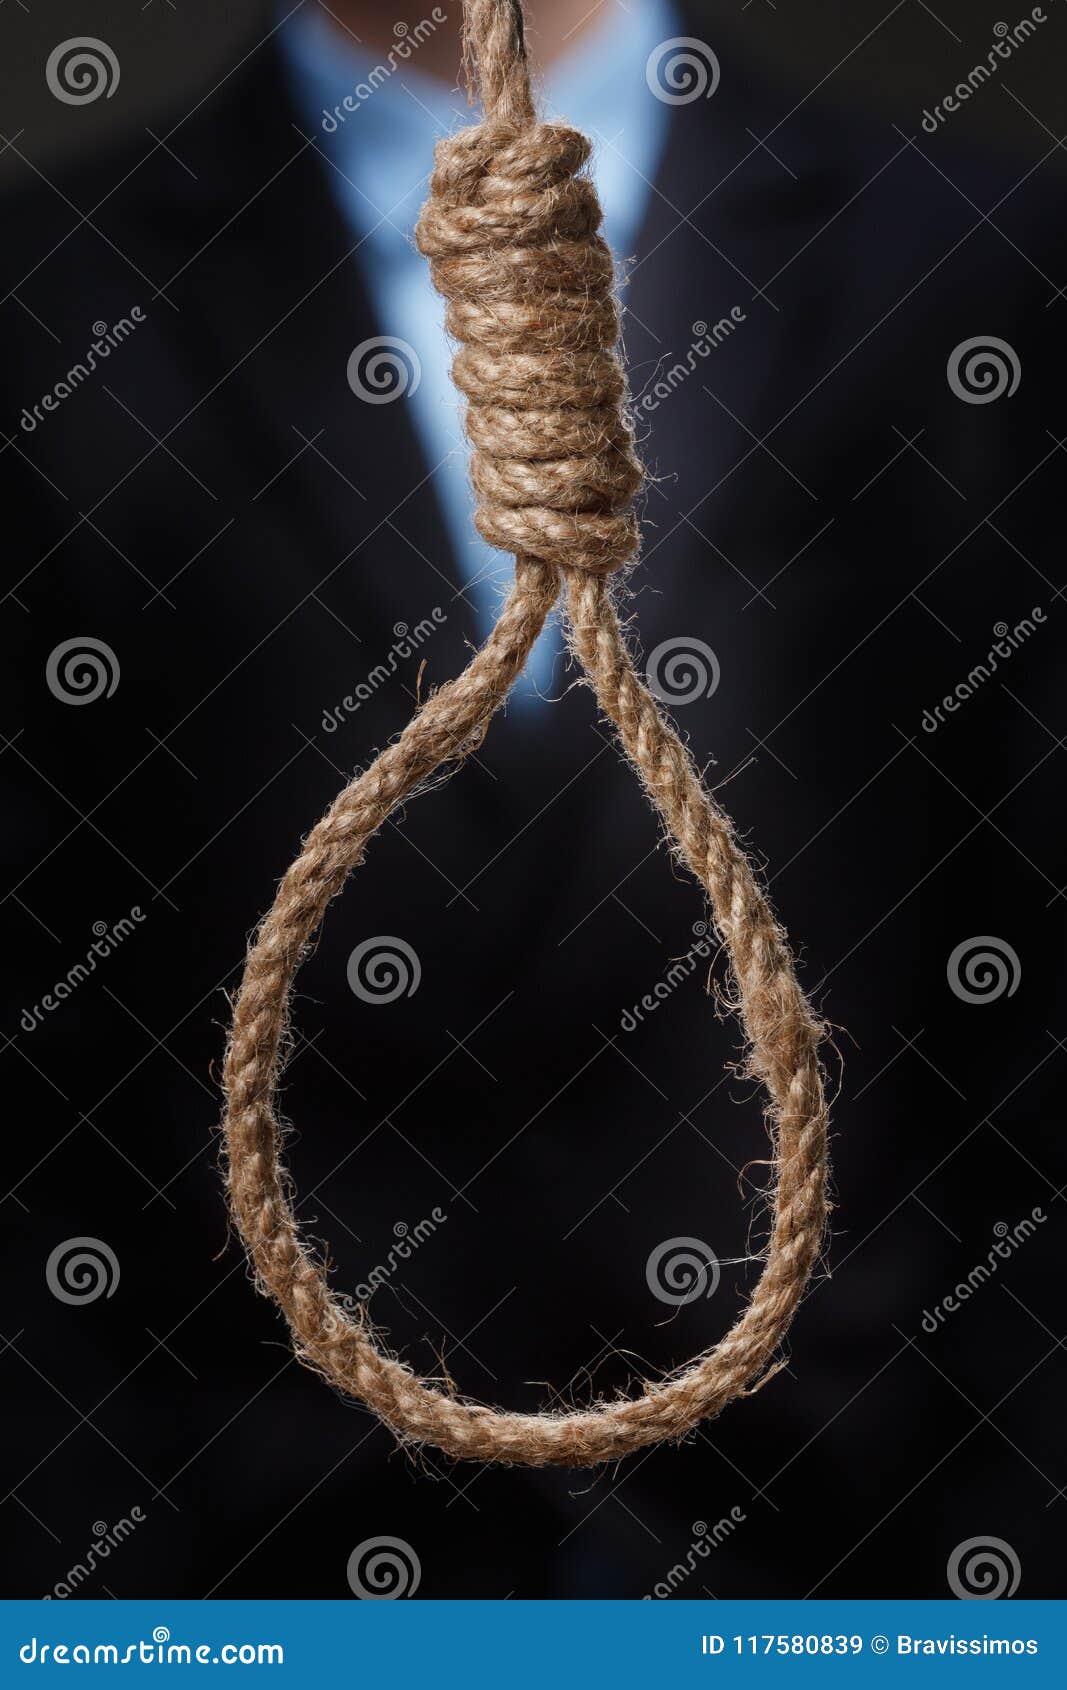 Hopeless Depressed Young Man Is About To Hang Himself On